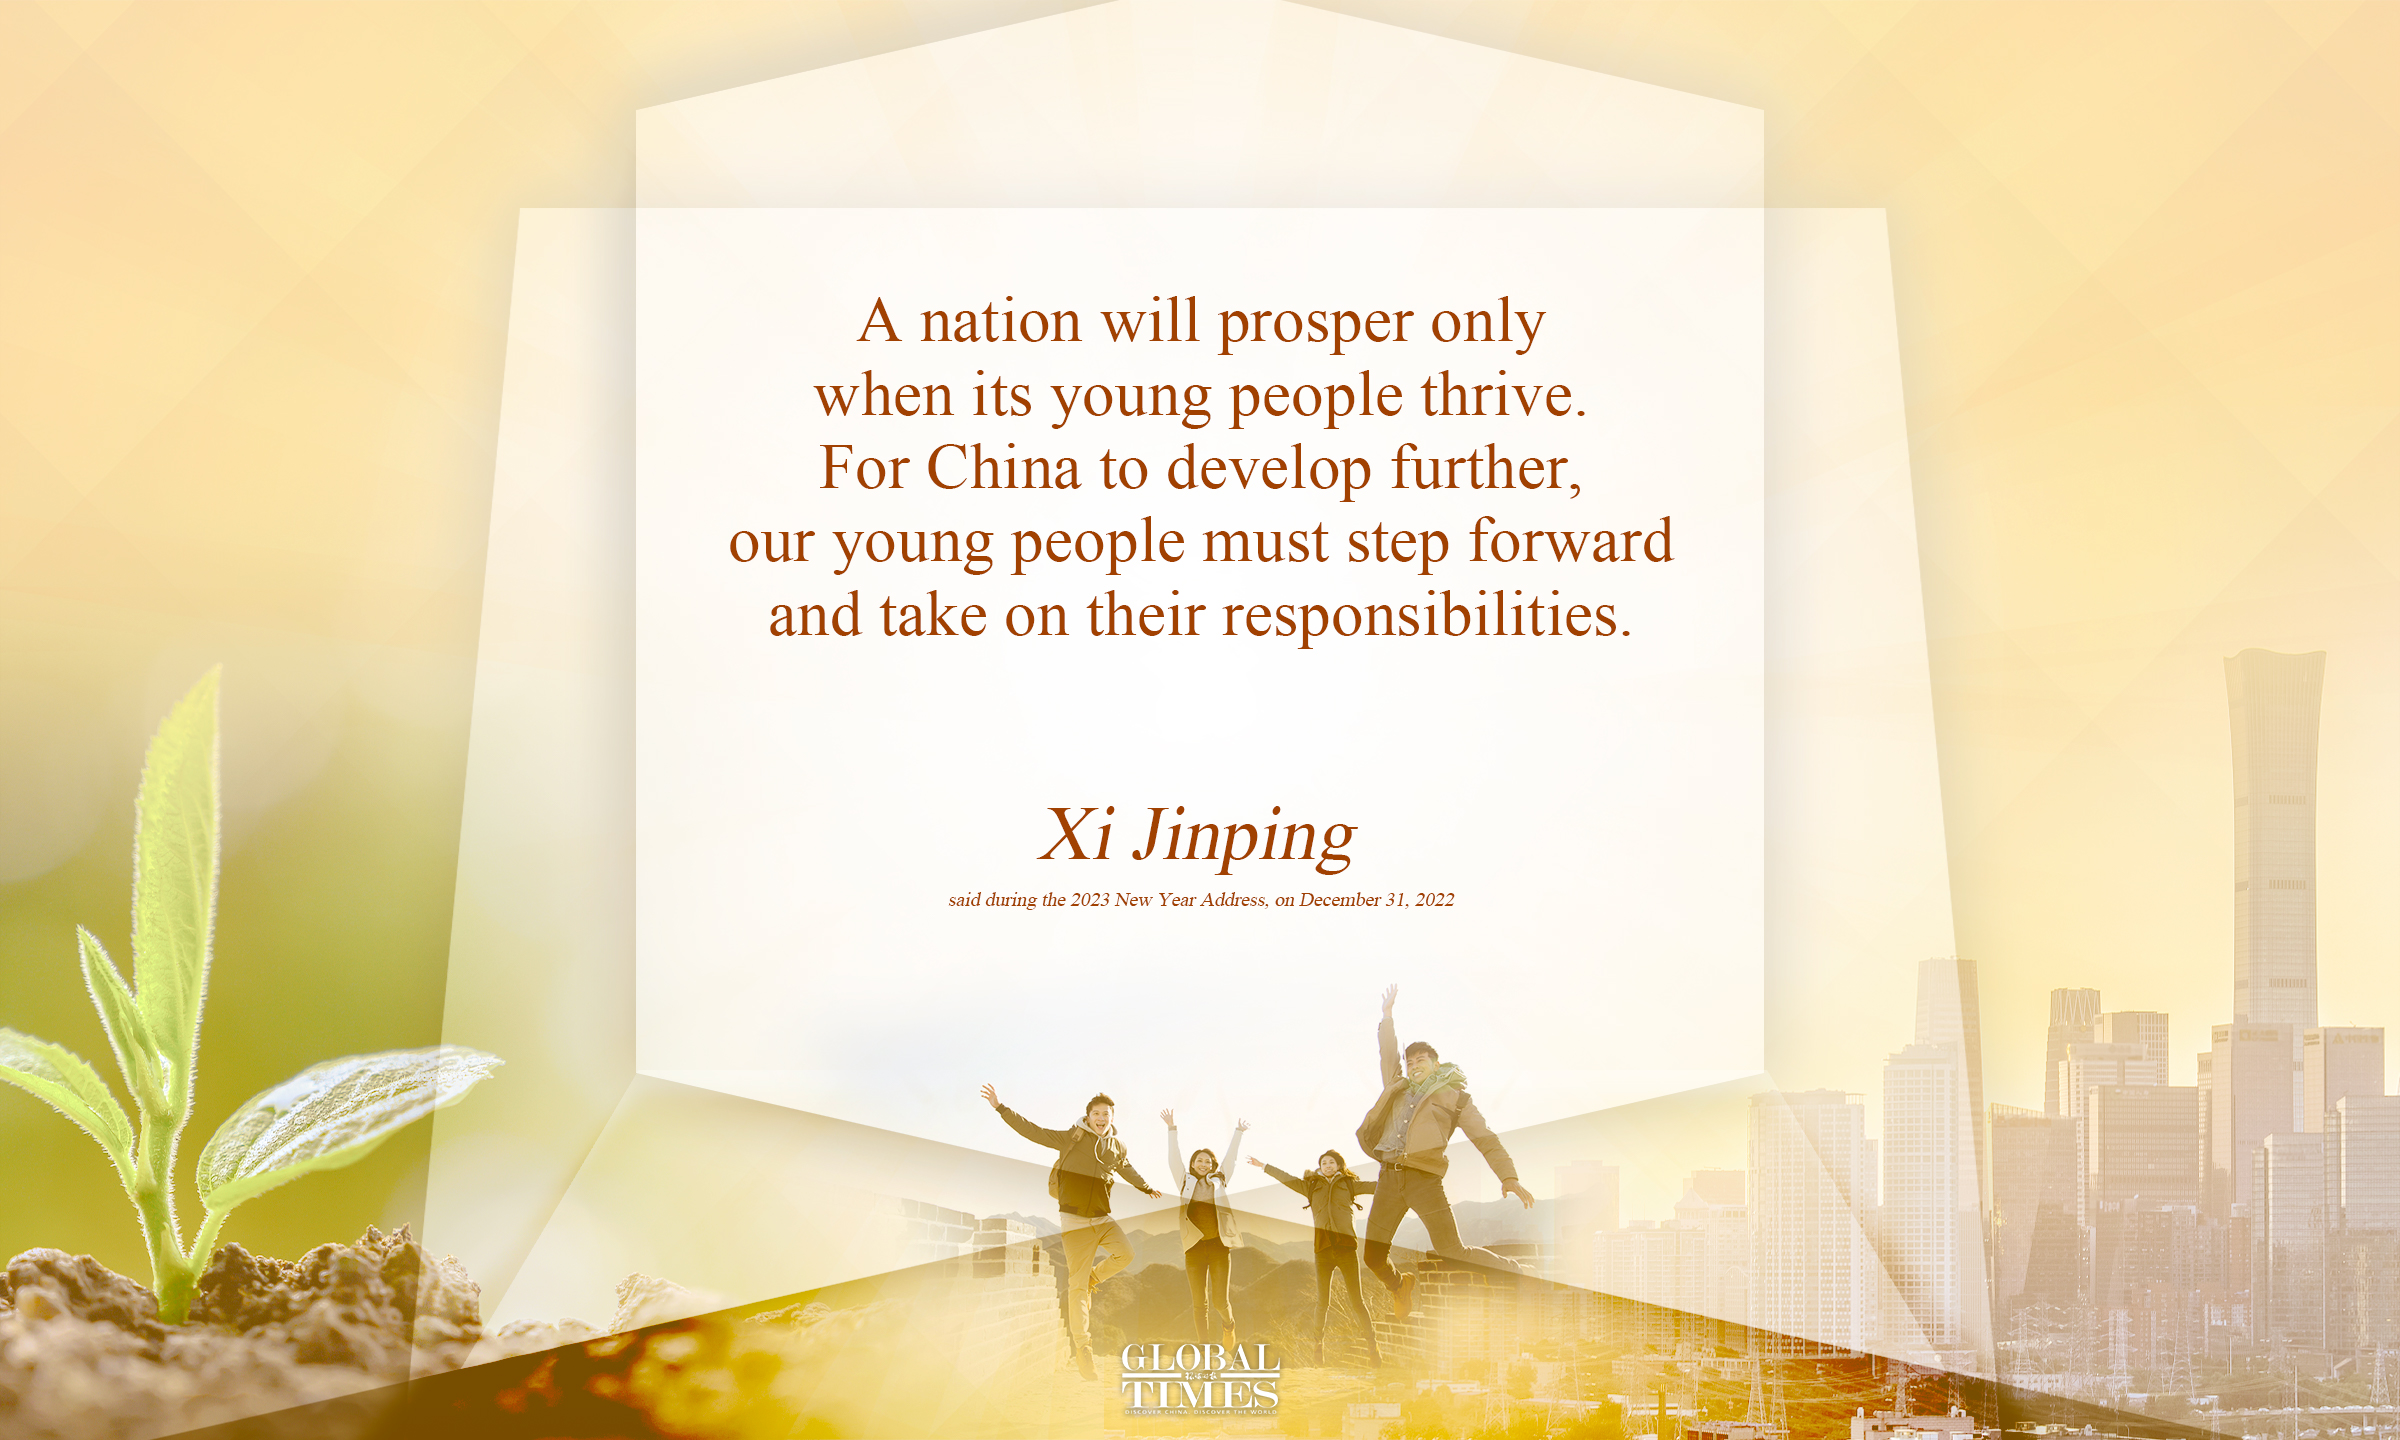 Highlights of Xi's remarks on expectations for Chinese youth